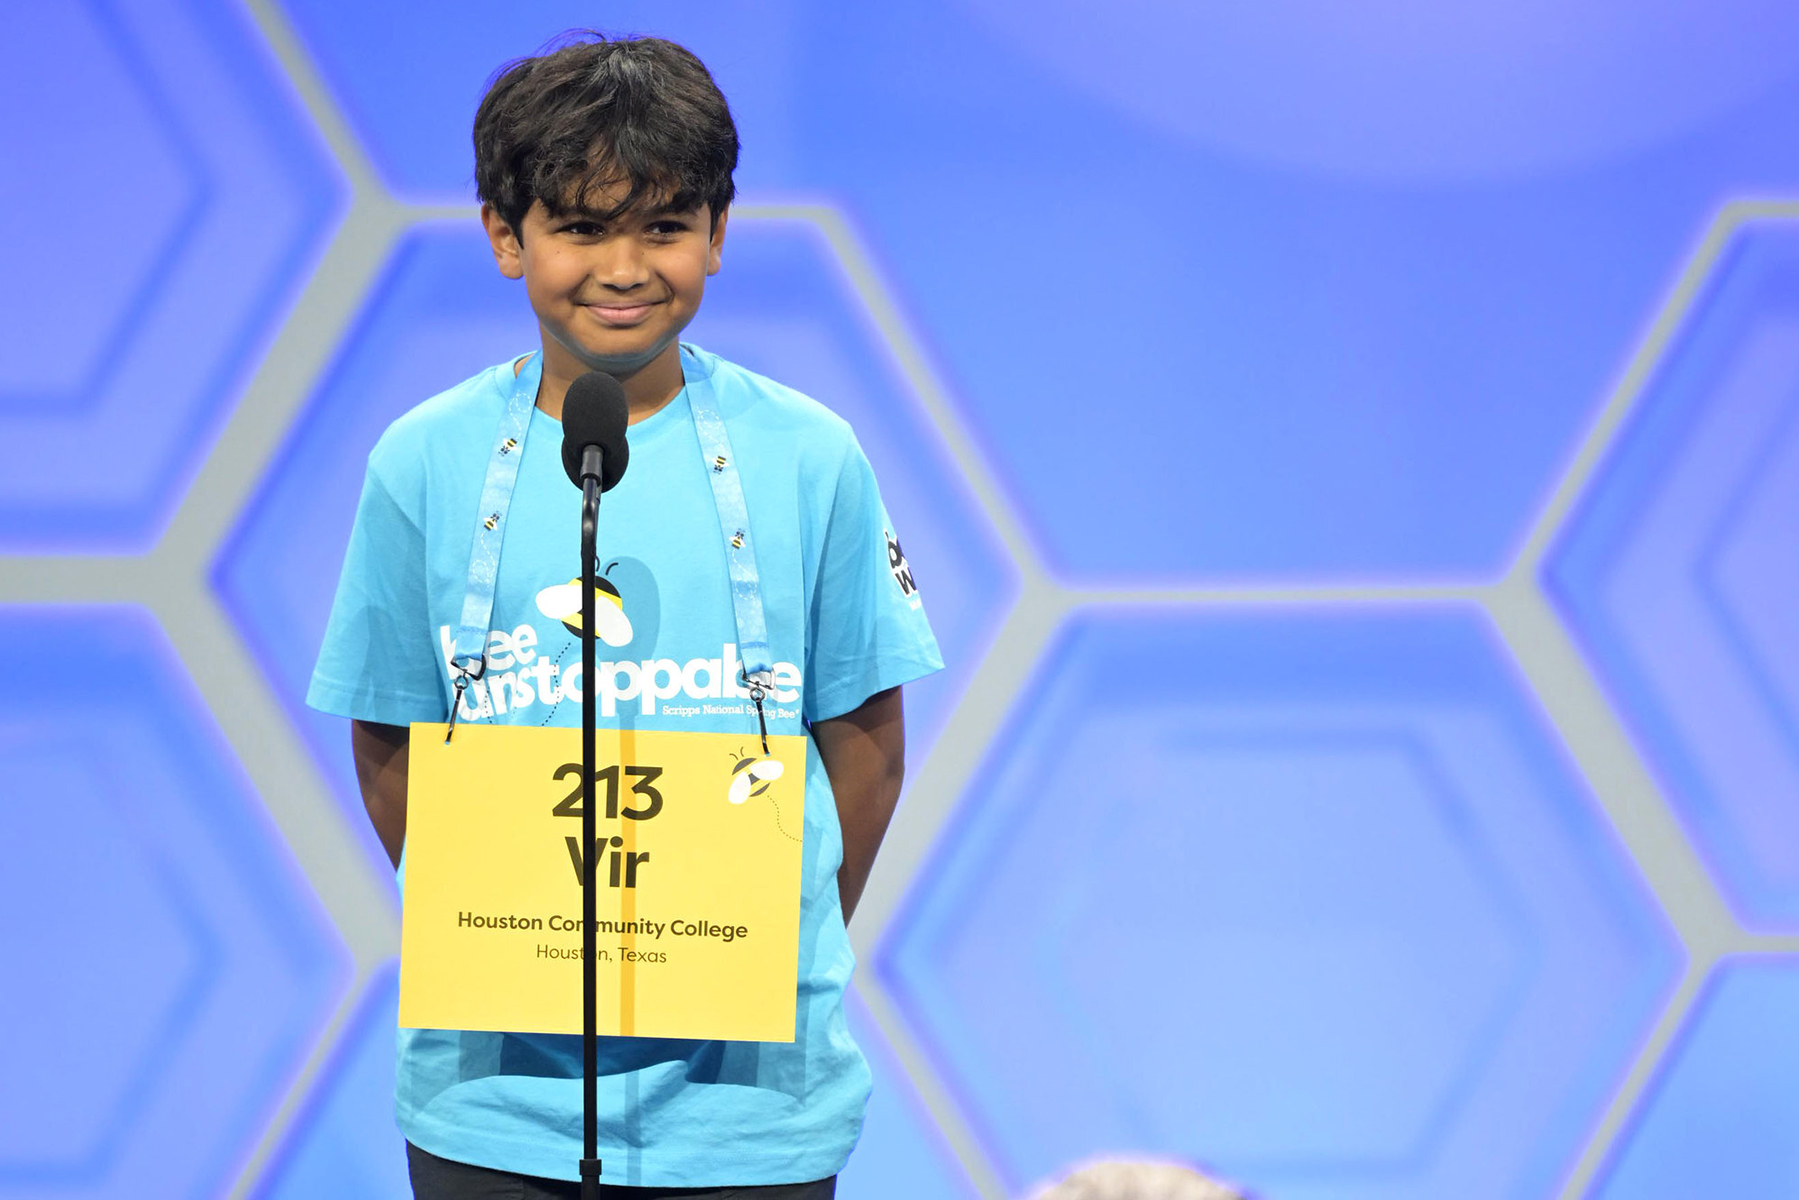 CFISD Fifth Grade Student Places in Top 20 at Scripps National Spelling Bee